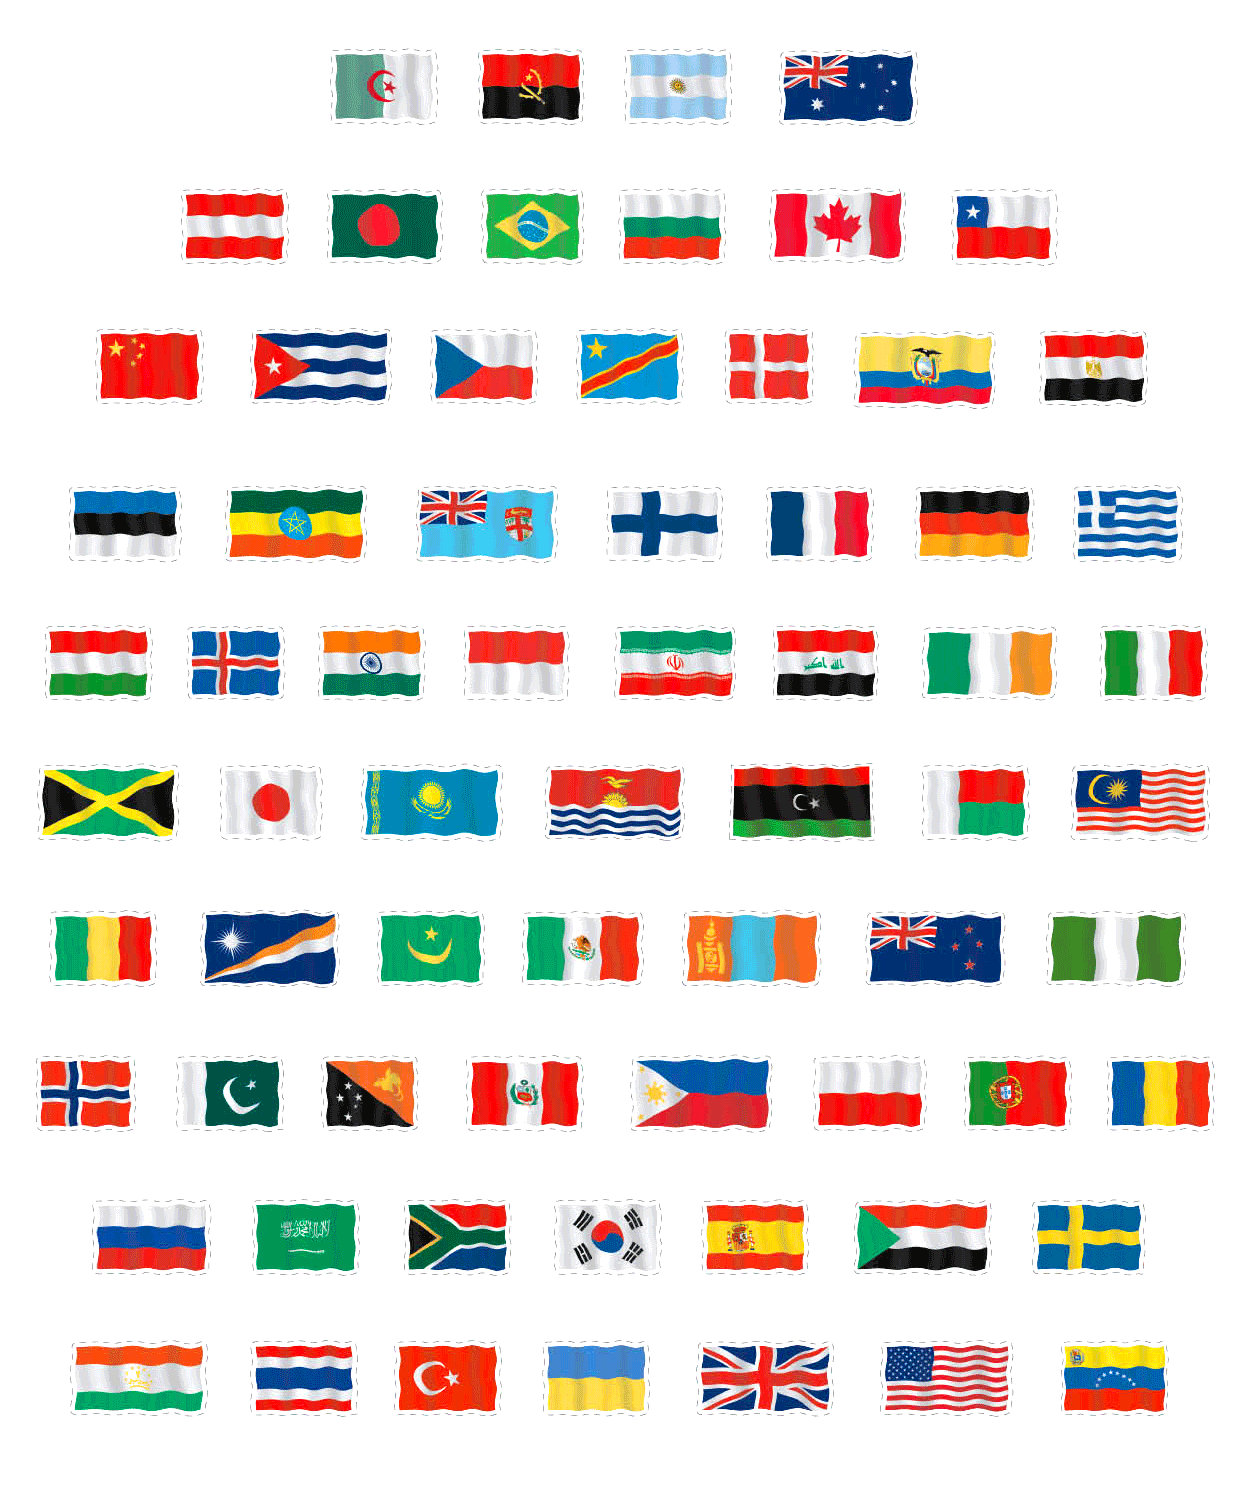 Can You Name These Flags Of The World?